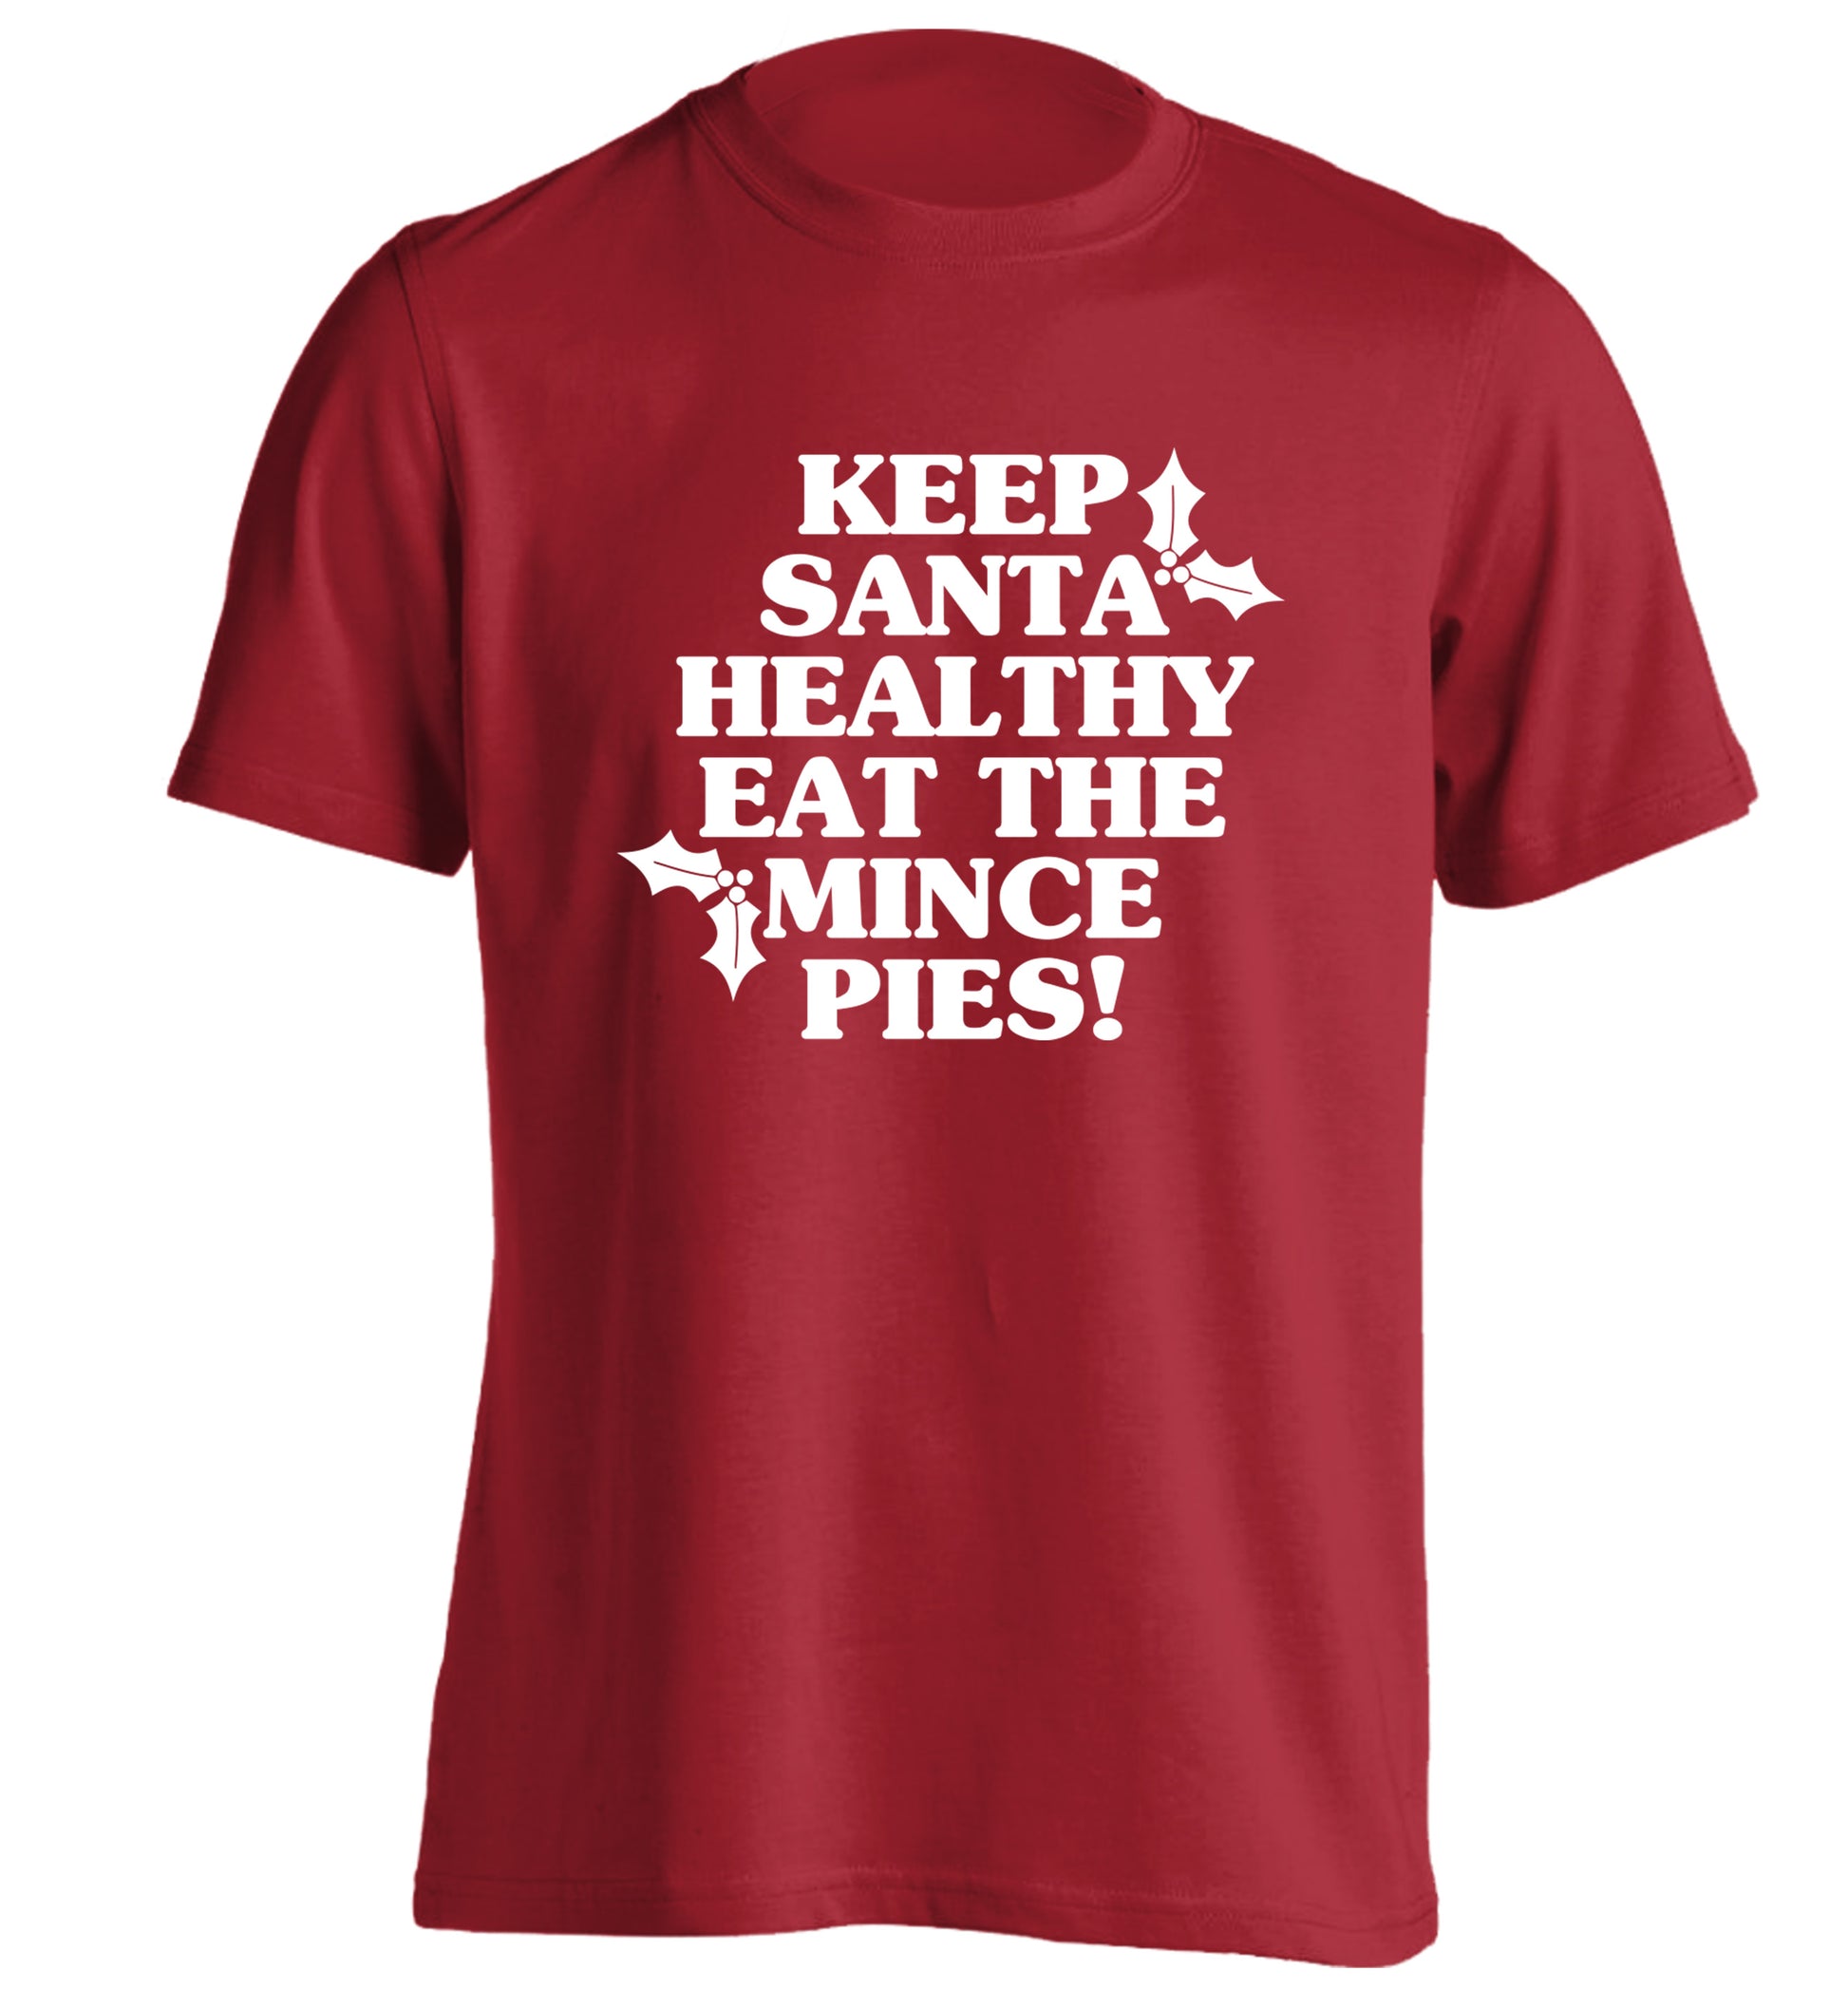 Keep santa healthy eat the mince pies adults unisex red Tshirt 2XL